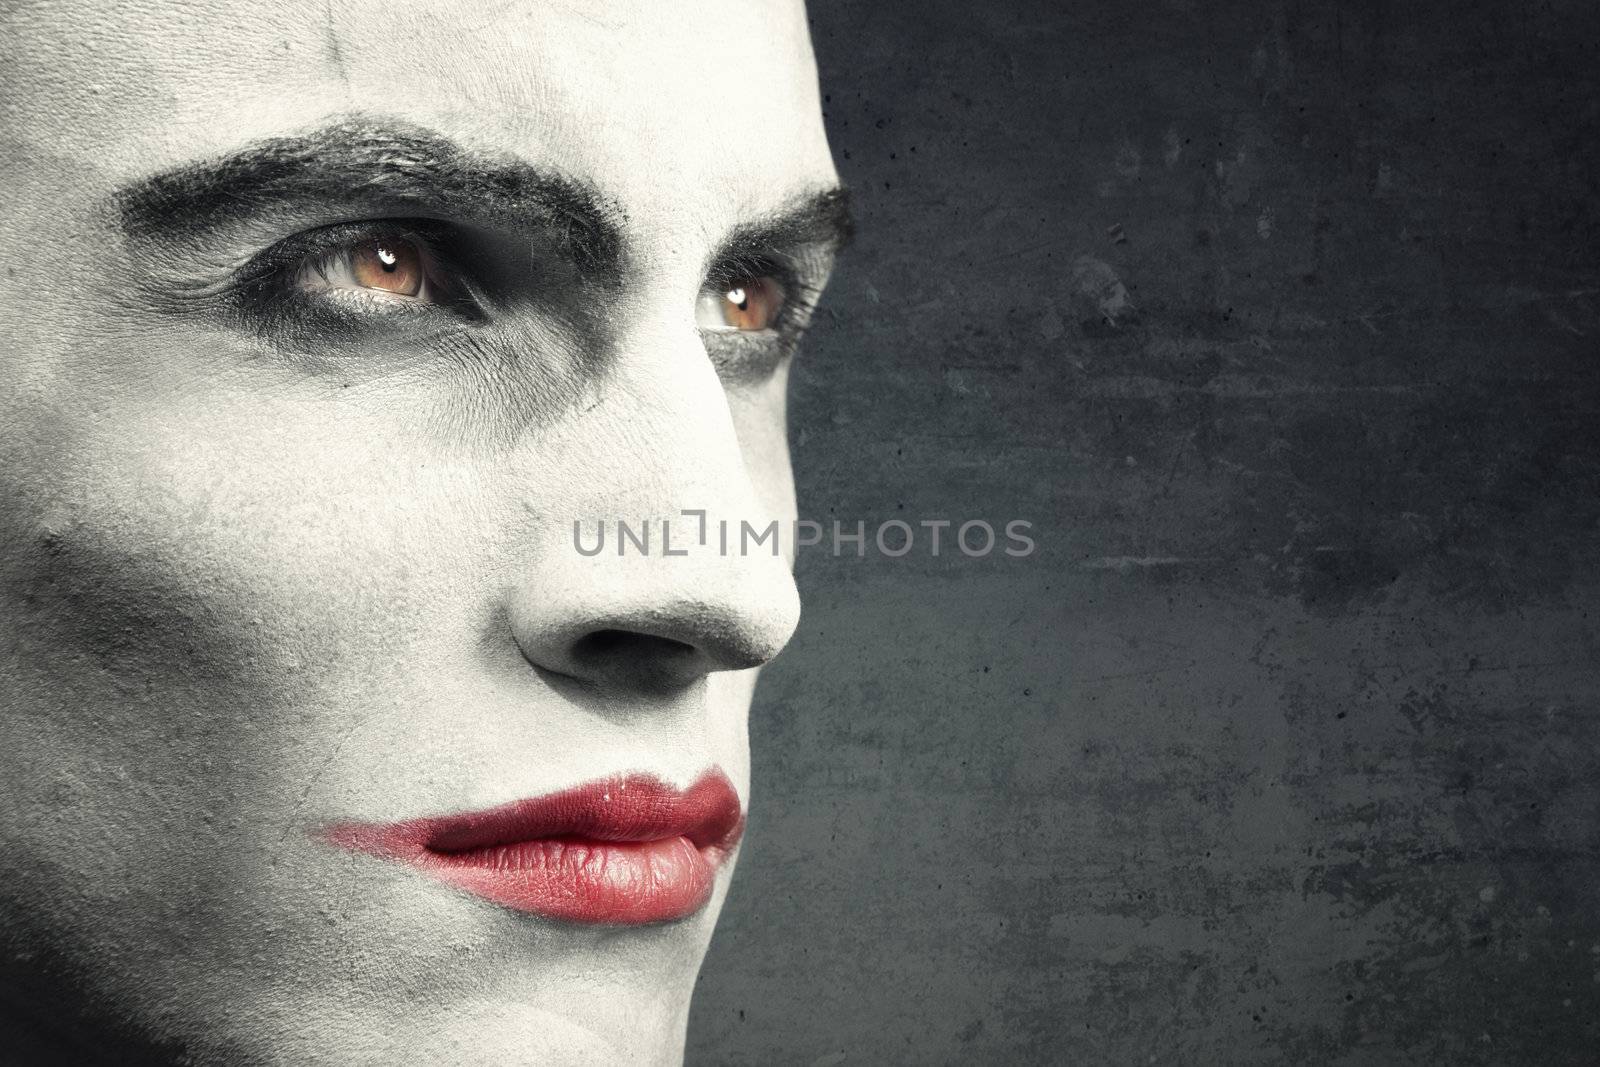 Man with vampire makeup on a dark grungy background. Natural makeup and background. Text can be added onto the empty space